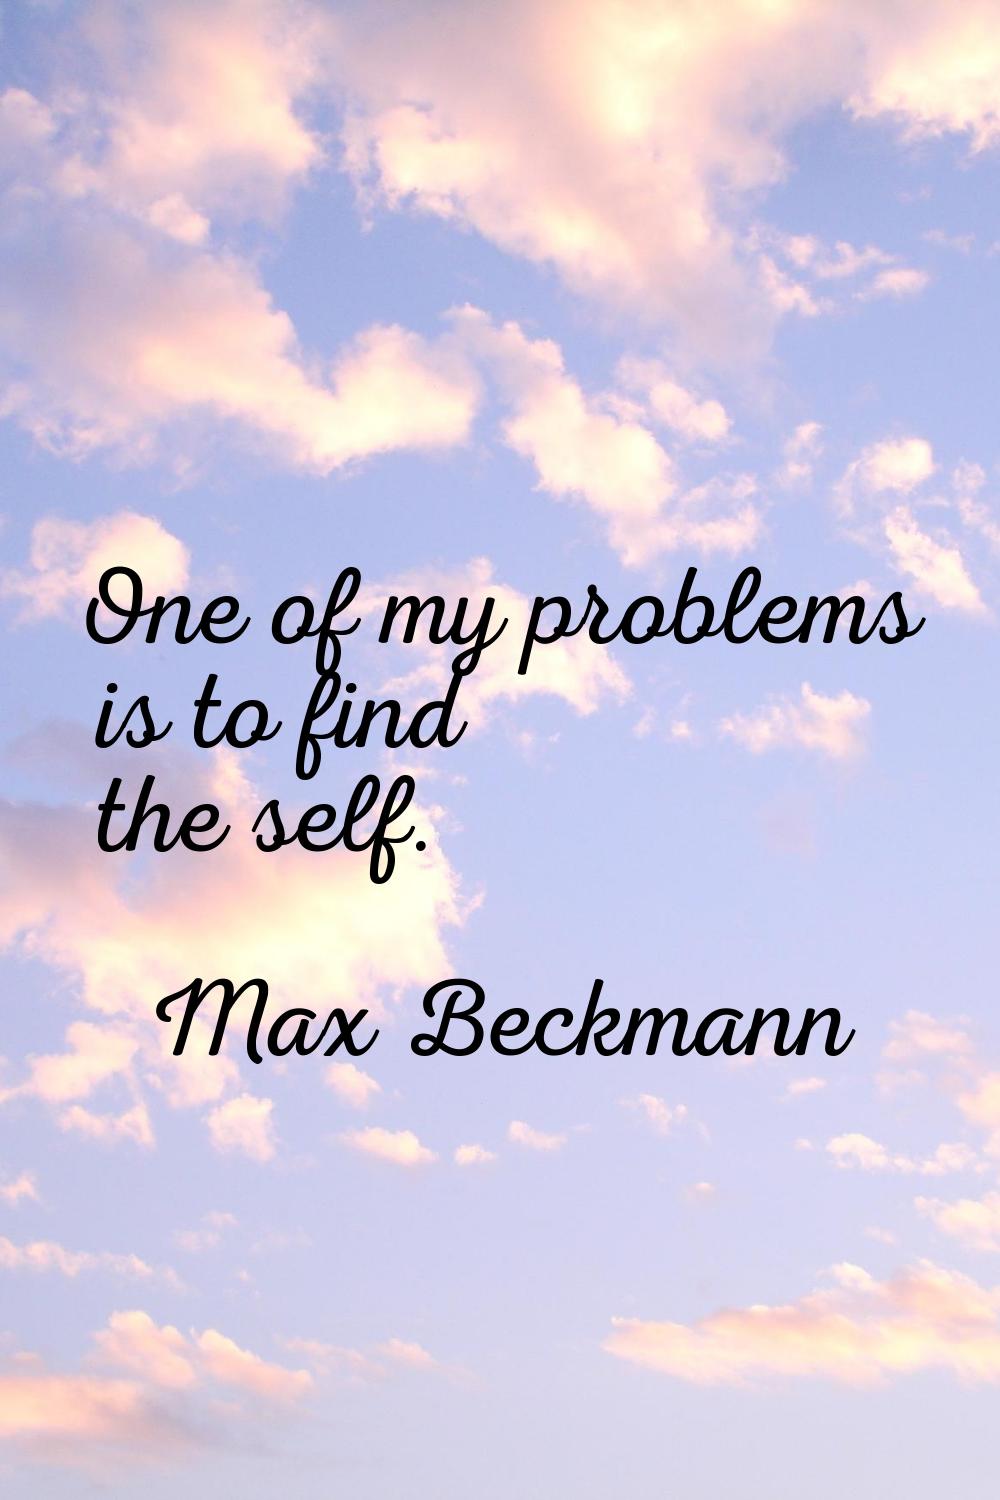 One of my problems is to find the self.